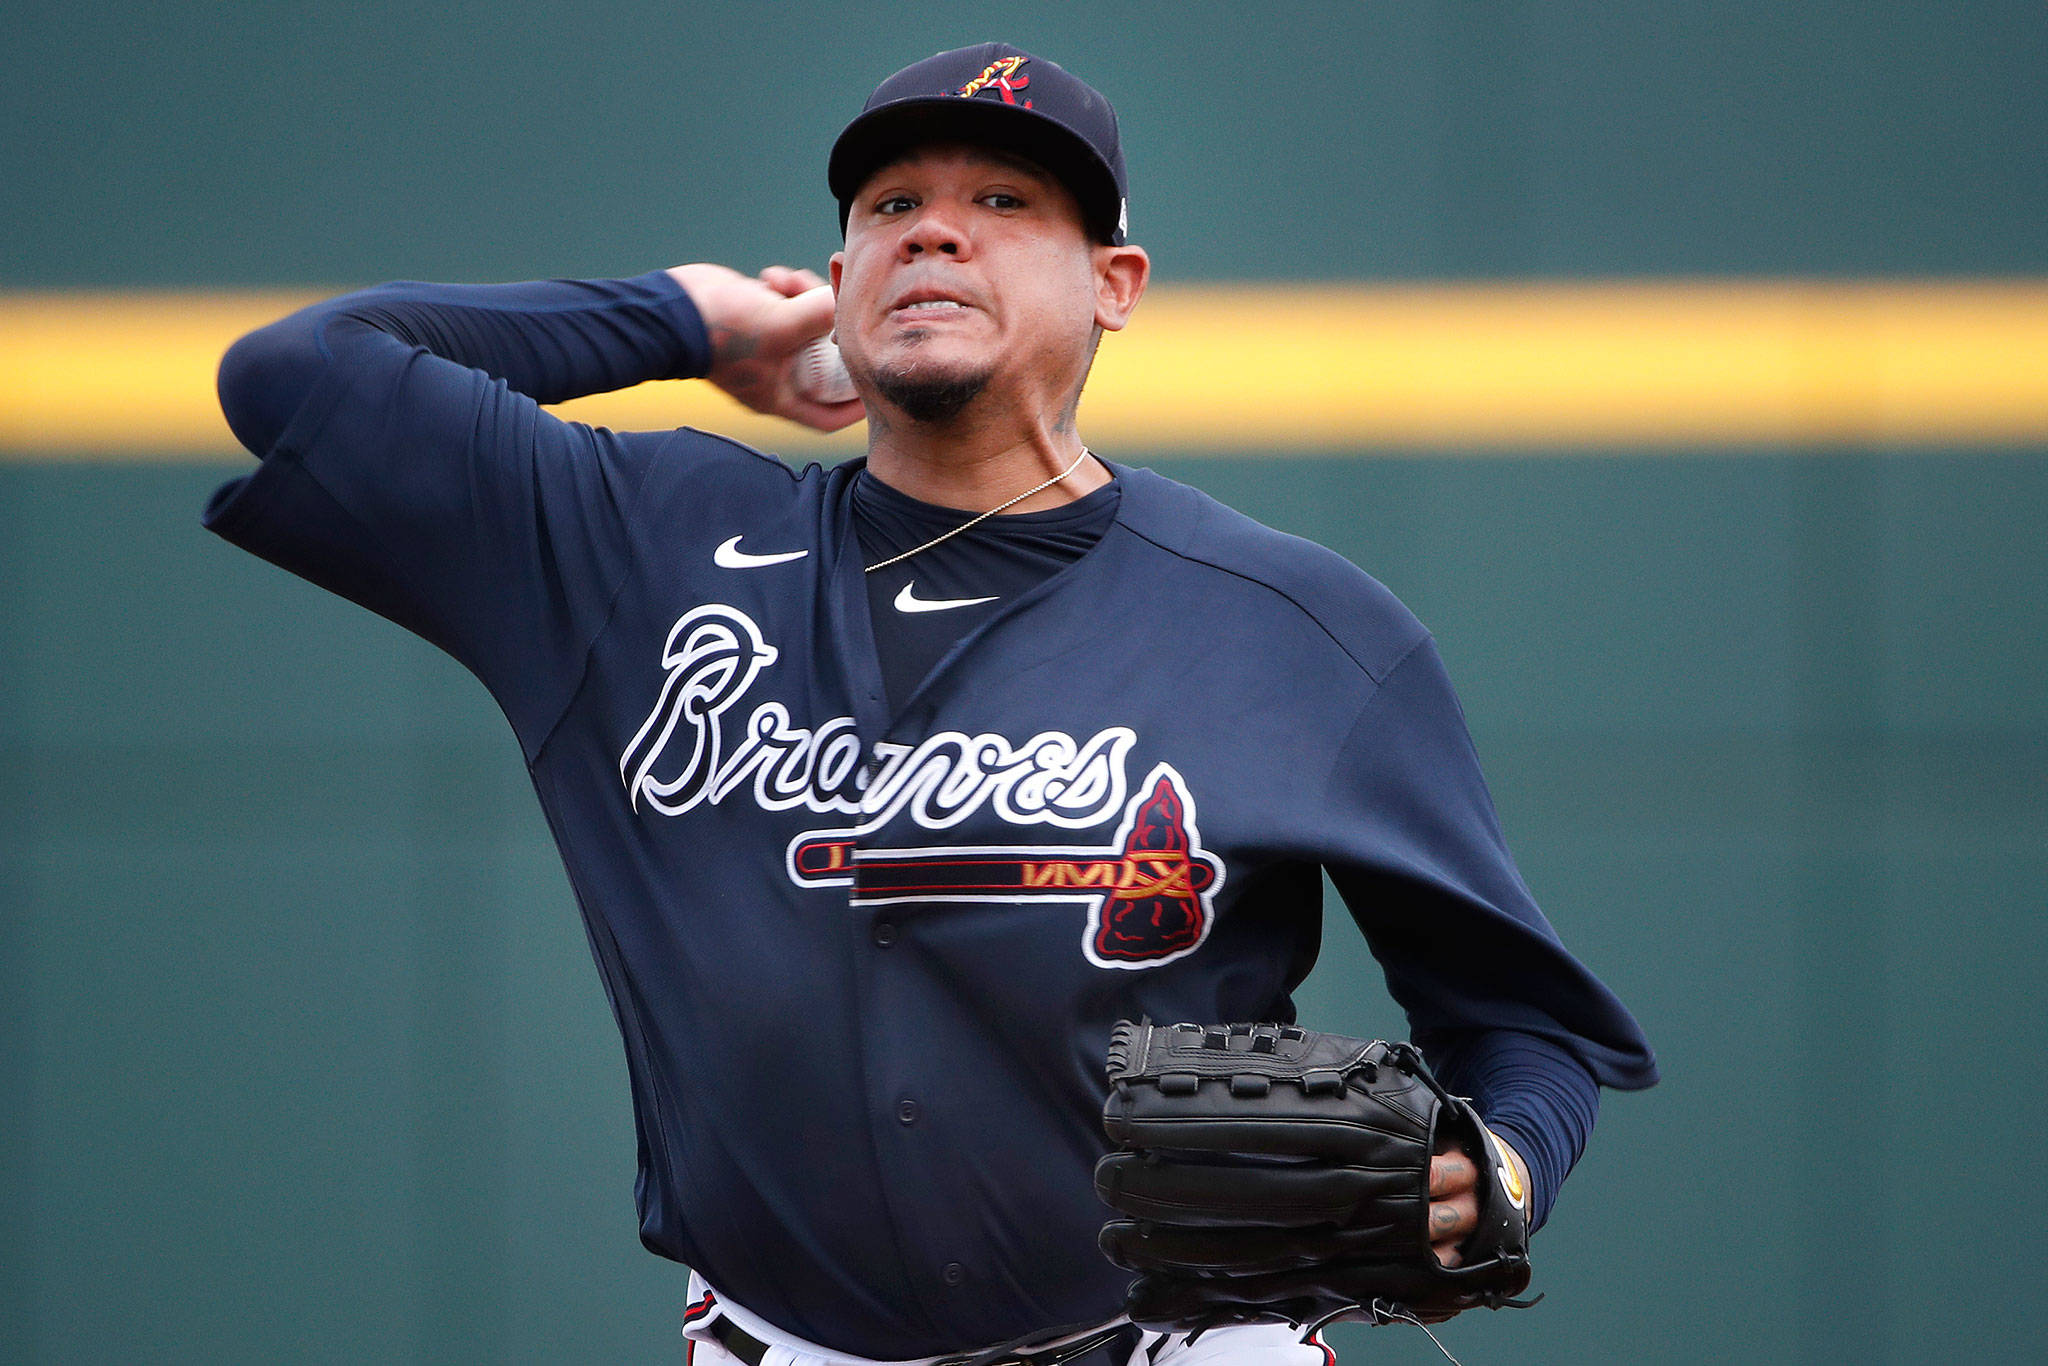 Braves starting pitcher Felix Hernandez warms up before a spring training game against the Rays on March 3 in Venice, Florida. (Associated Press)